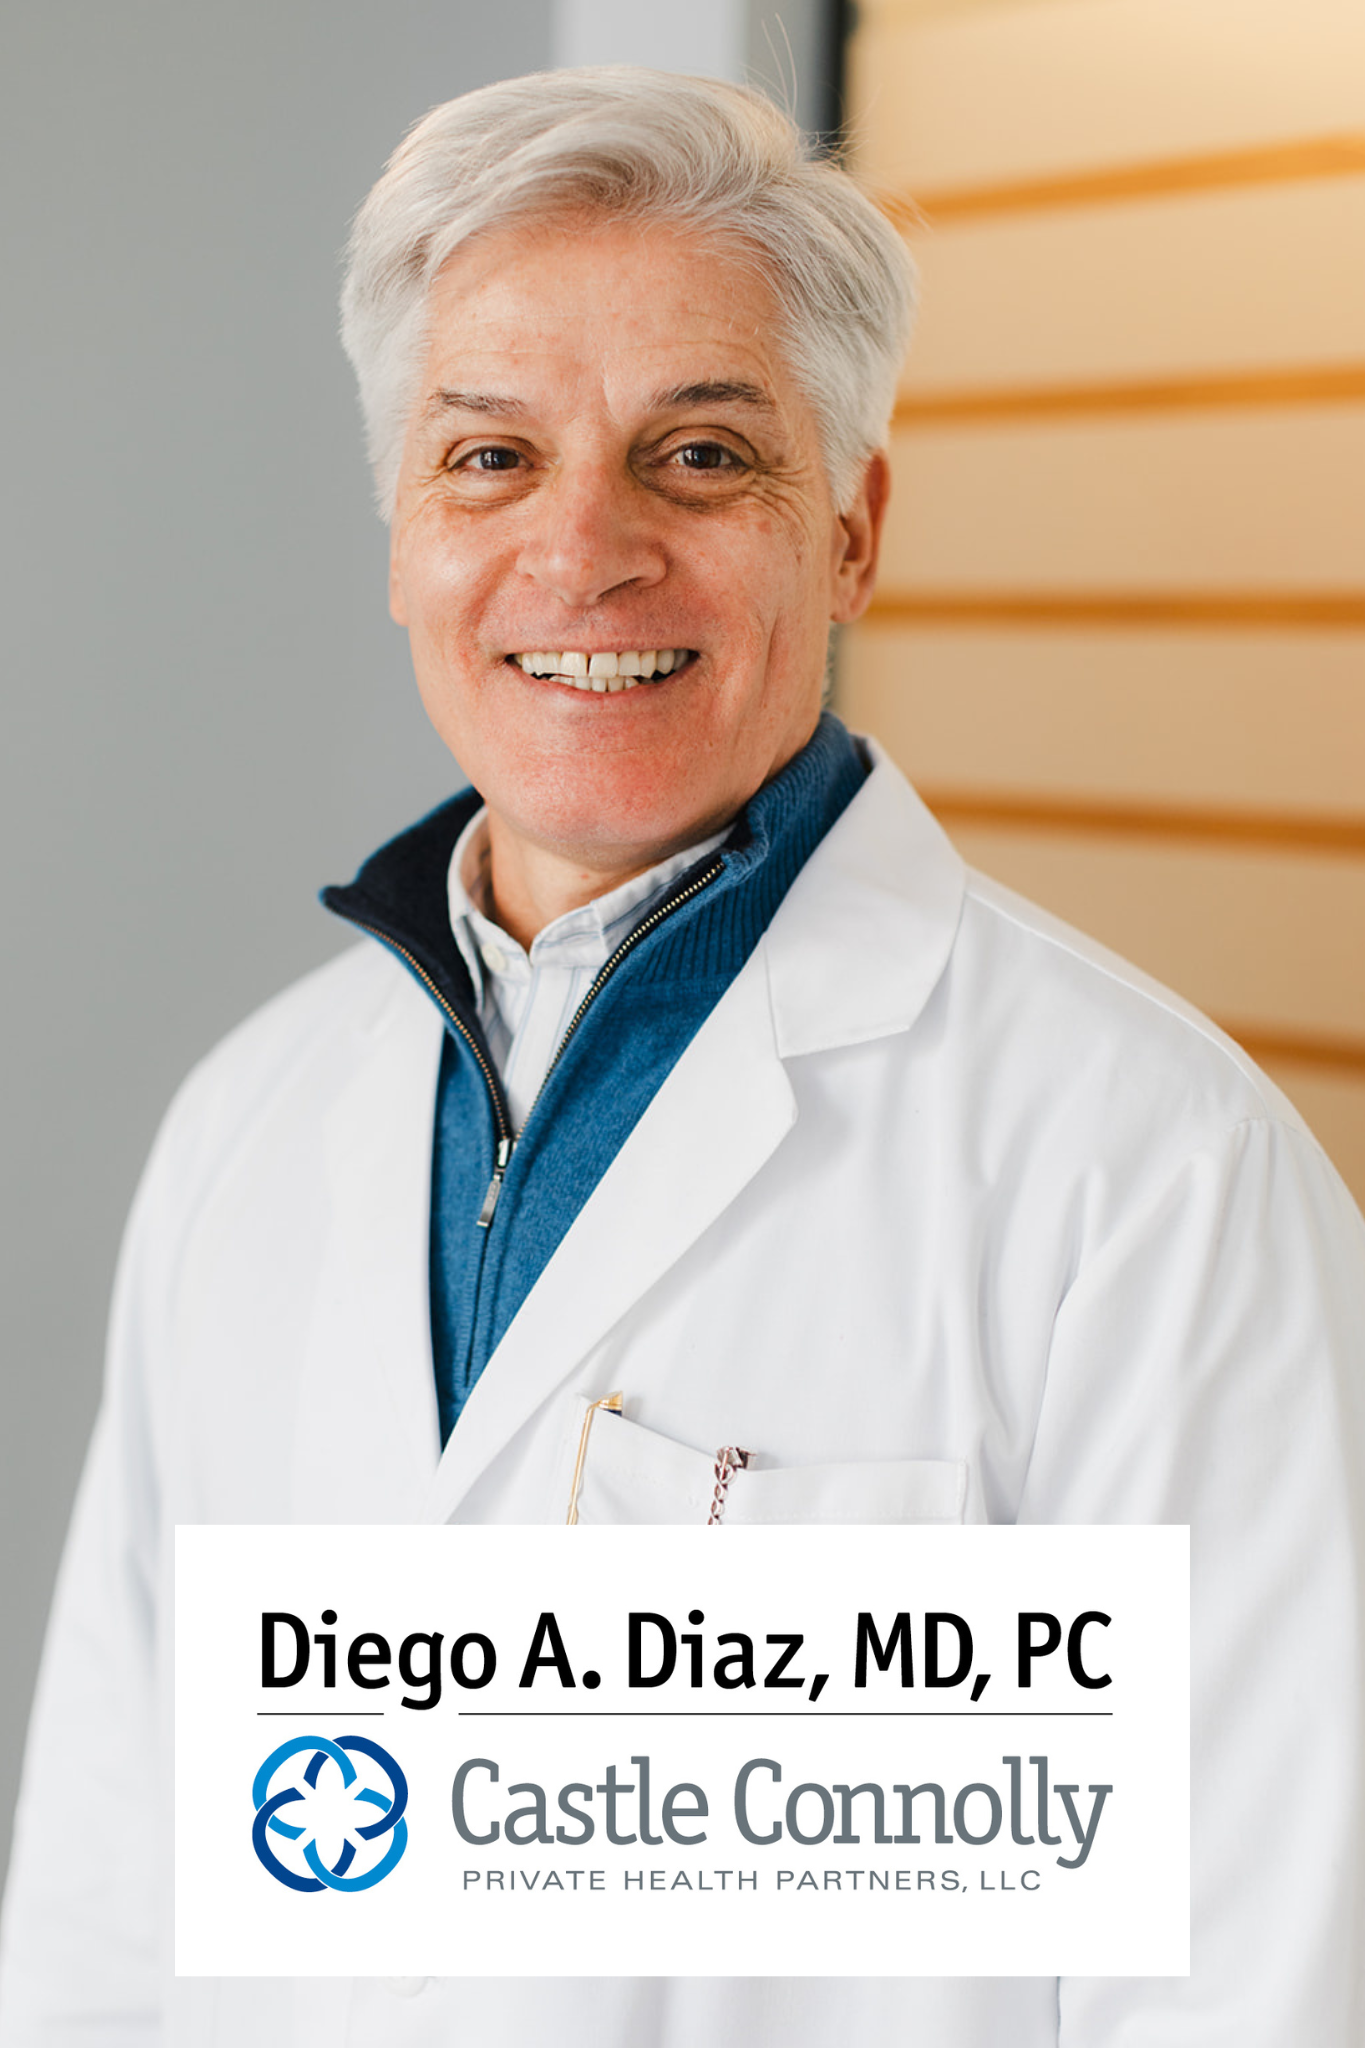 Dr. Diego Diaz Collaborates with Castle Connolly Private Health Partners to Create a Concierge Medical Program that Offers a Personalized Approach to Patient Care